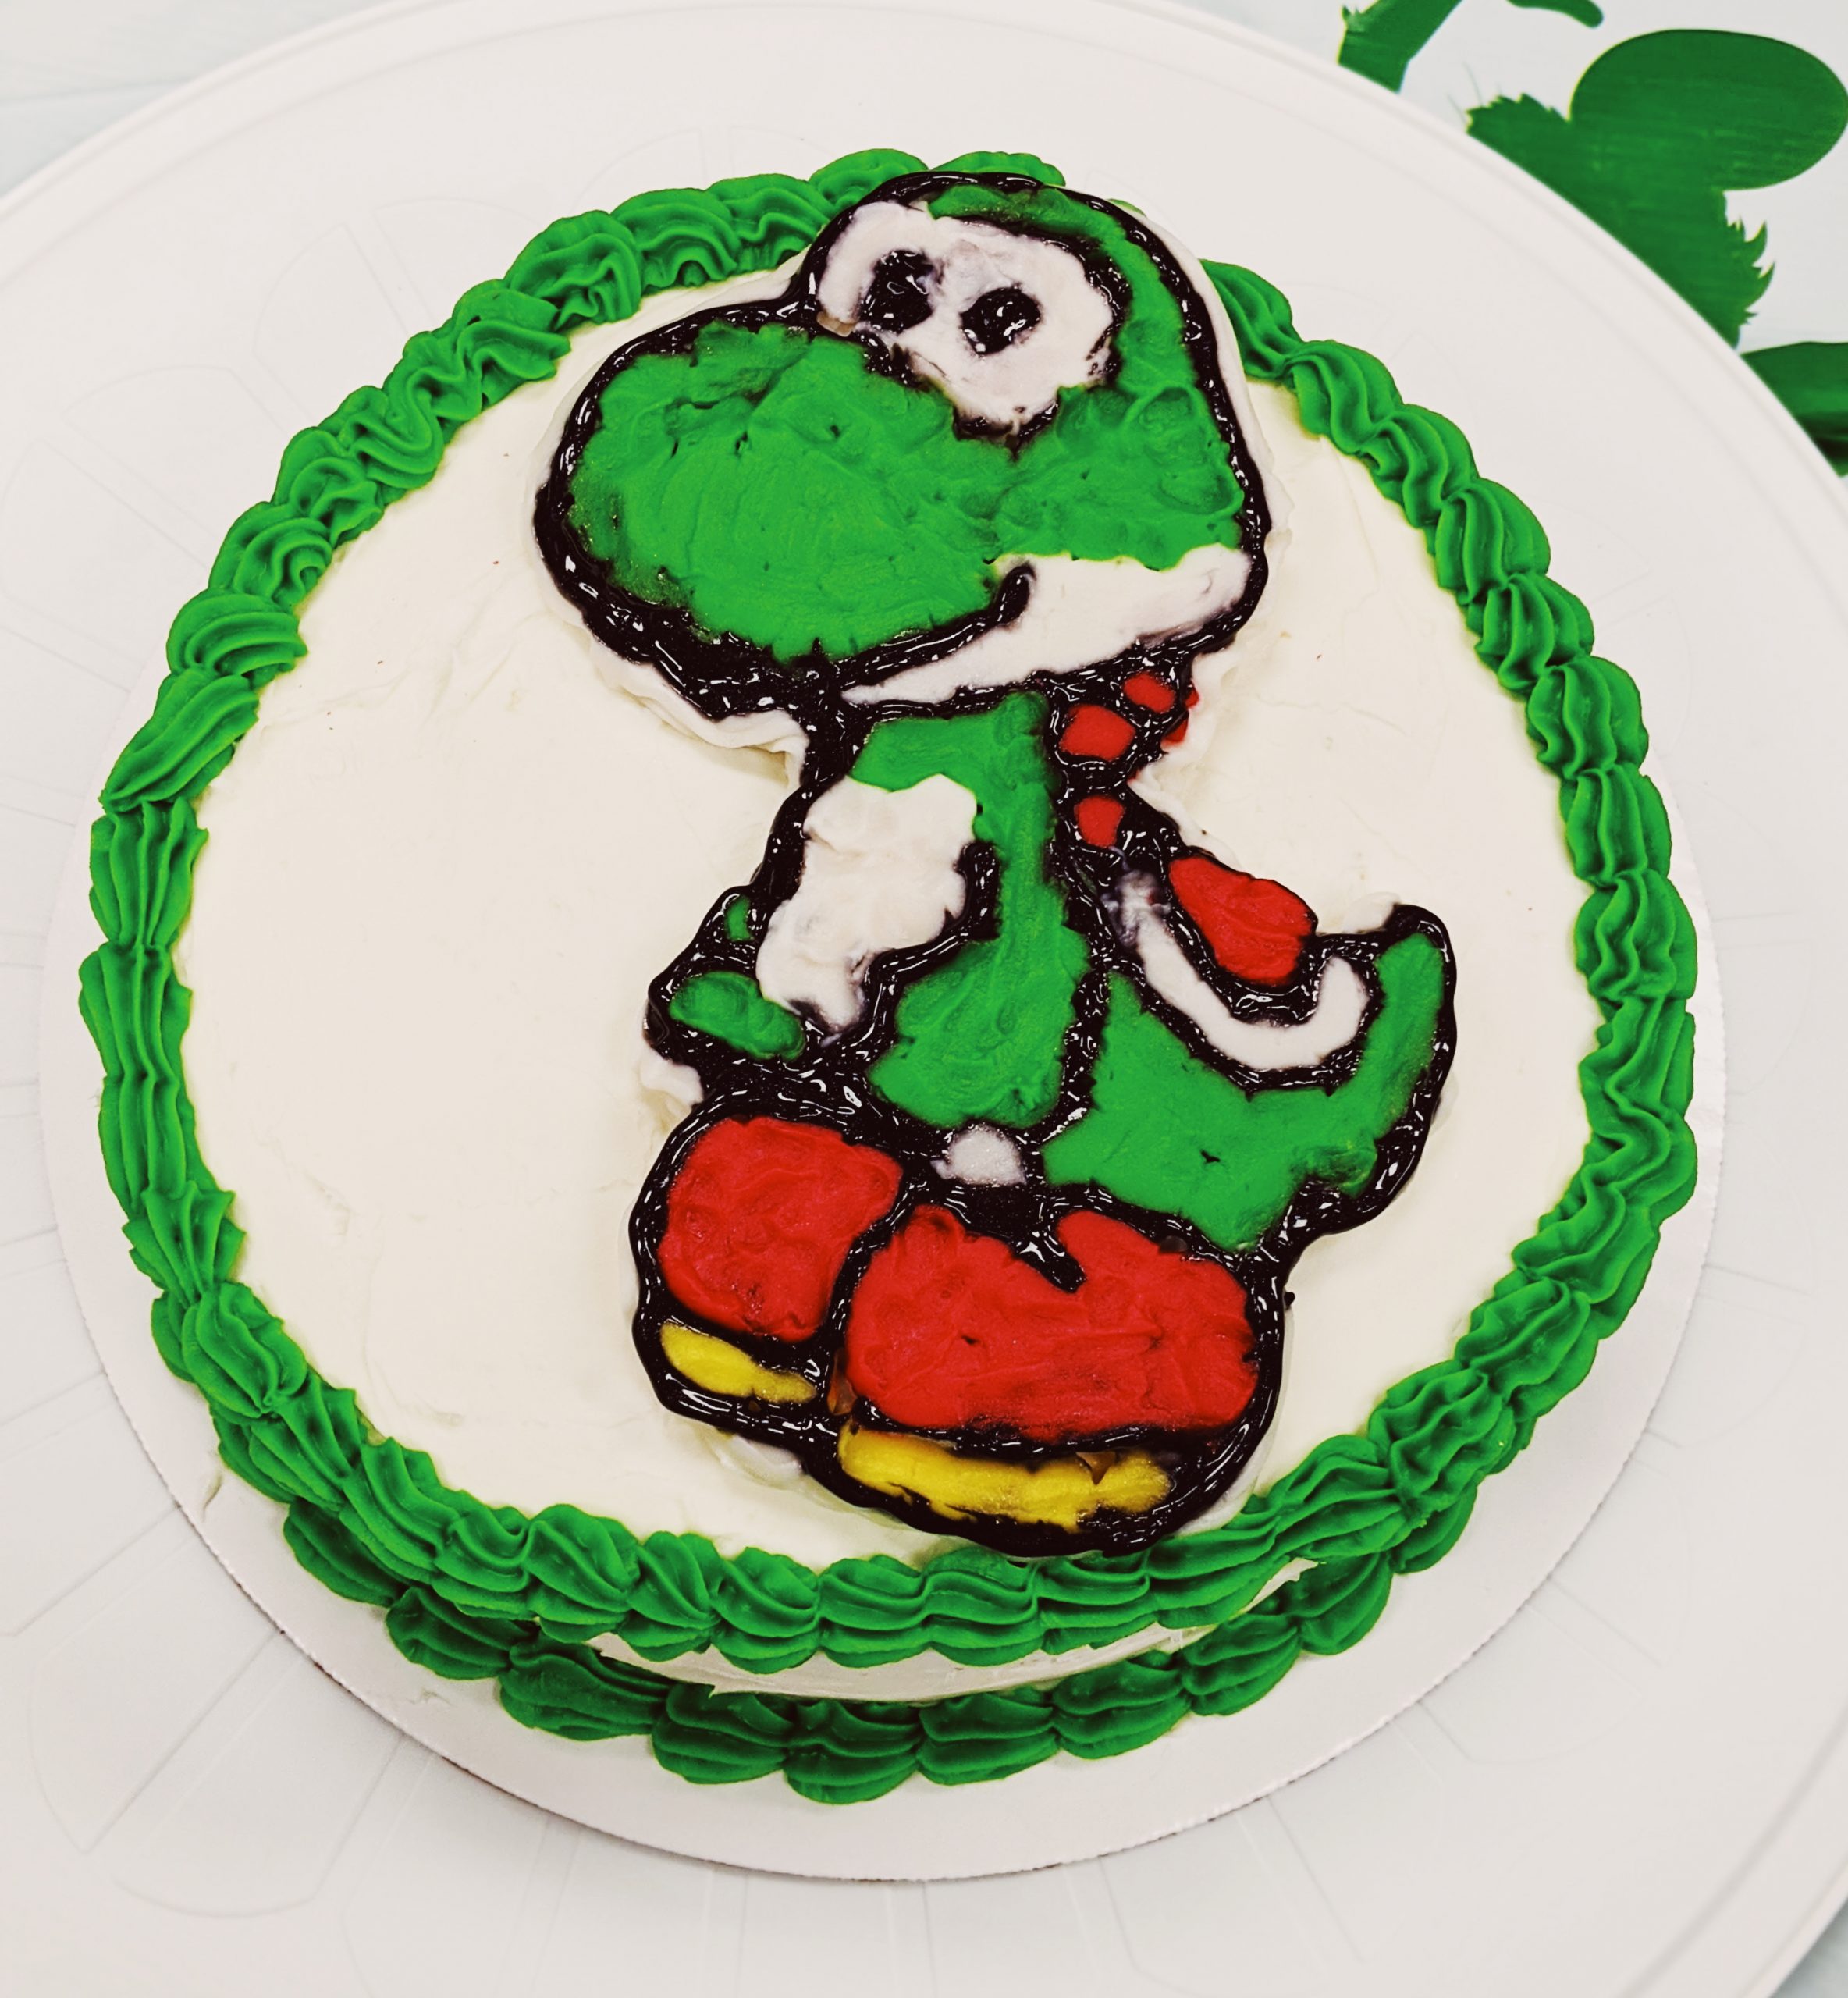 How to Make a Character Cake - DIY Character Cake: Easy DIY Instructions to put ANY character on a cake! Here's how to do a frozen buttercream transfer to make a character cake. #cakedecorating #yoshi #cakes 